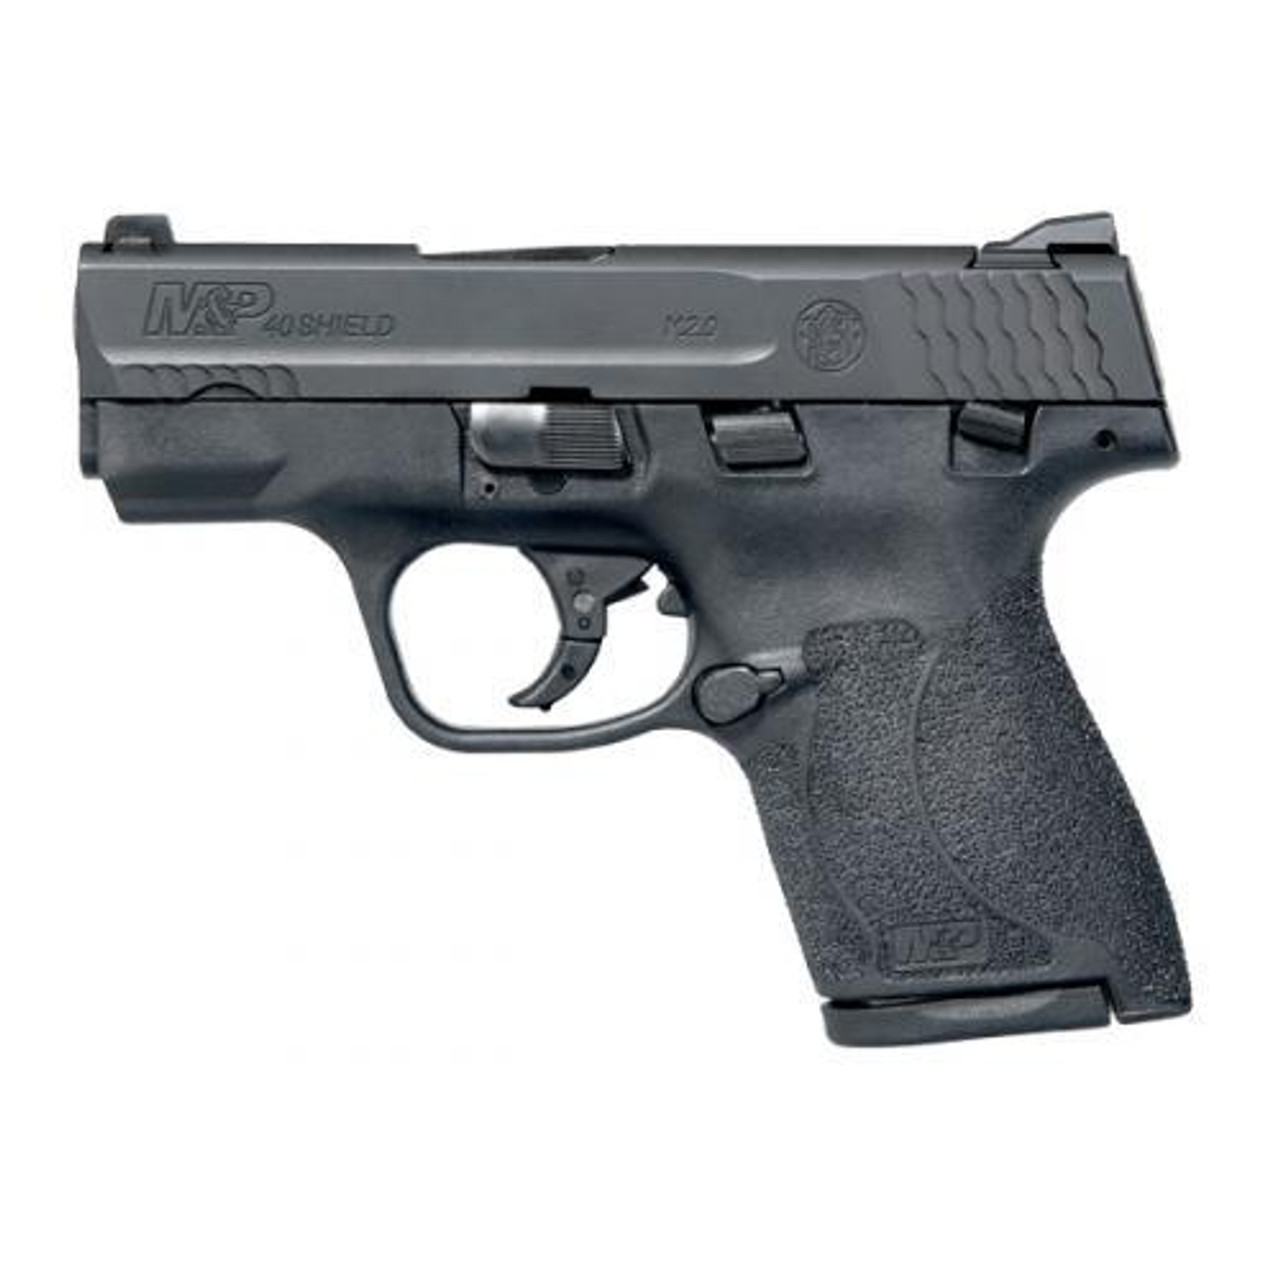 SMITH AND WESSON M&P40 SHIELD M2.0 40 S&W 11812